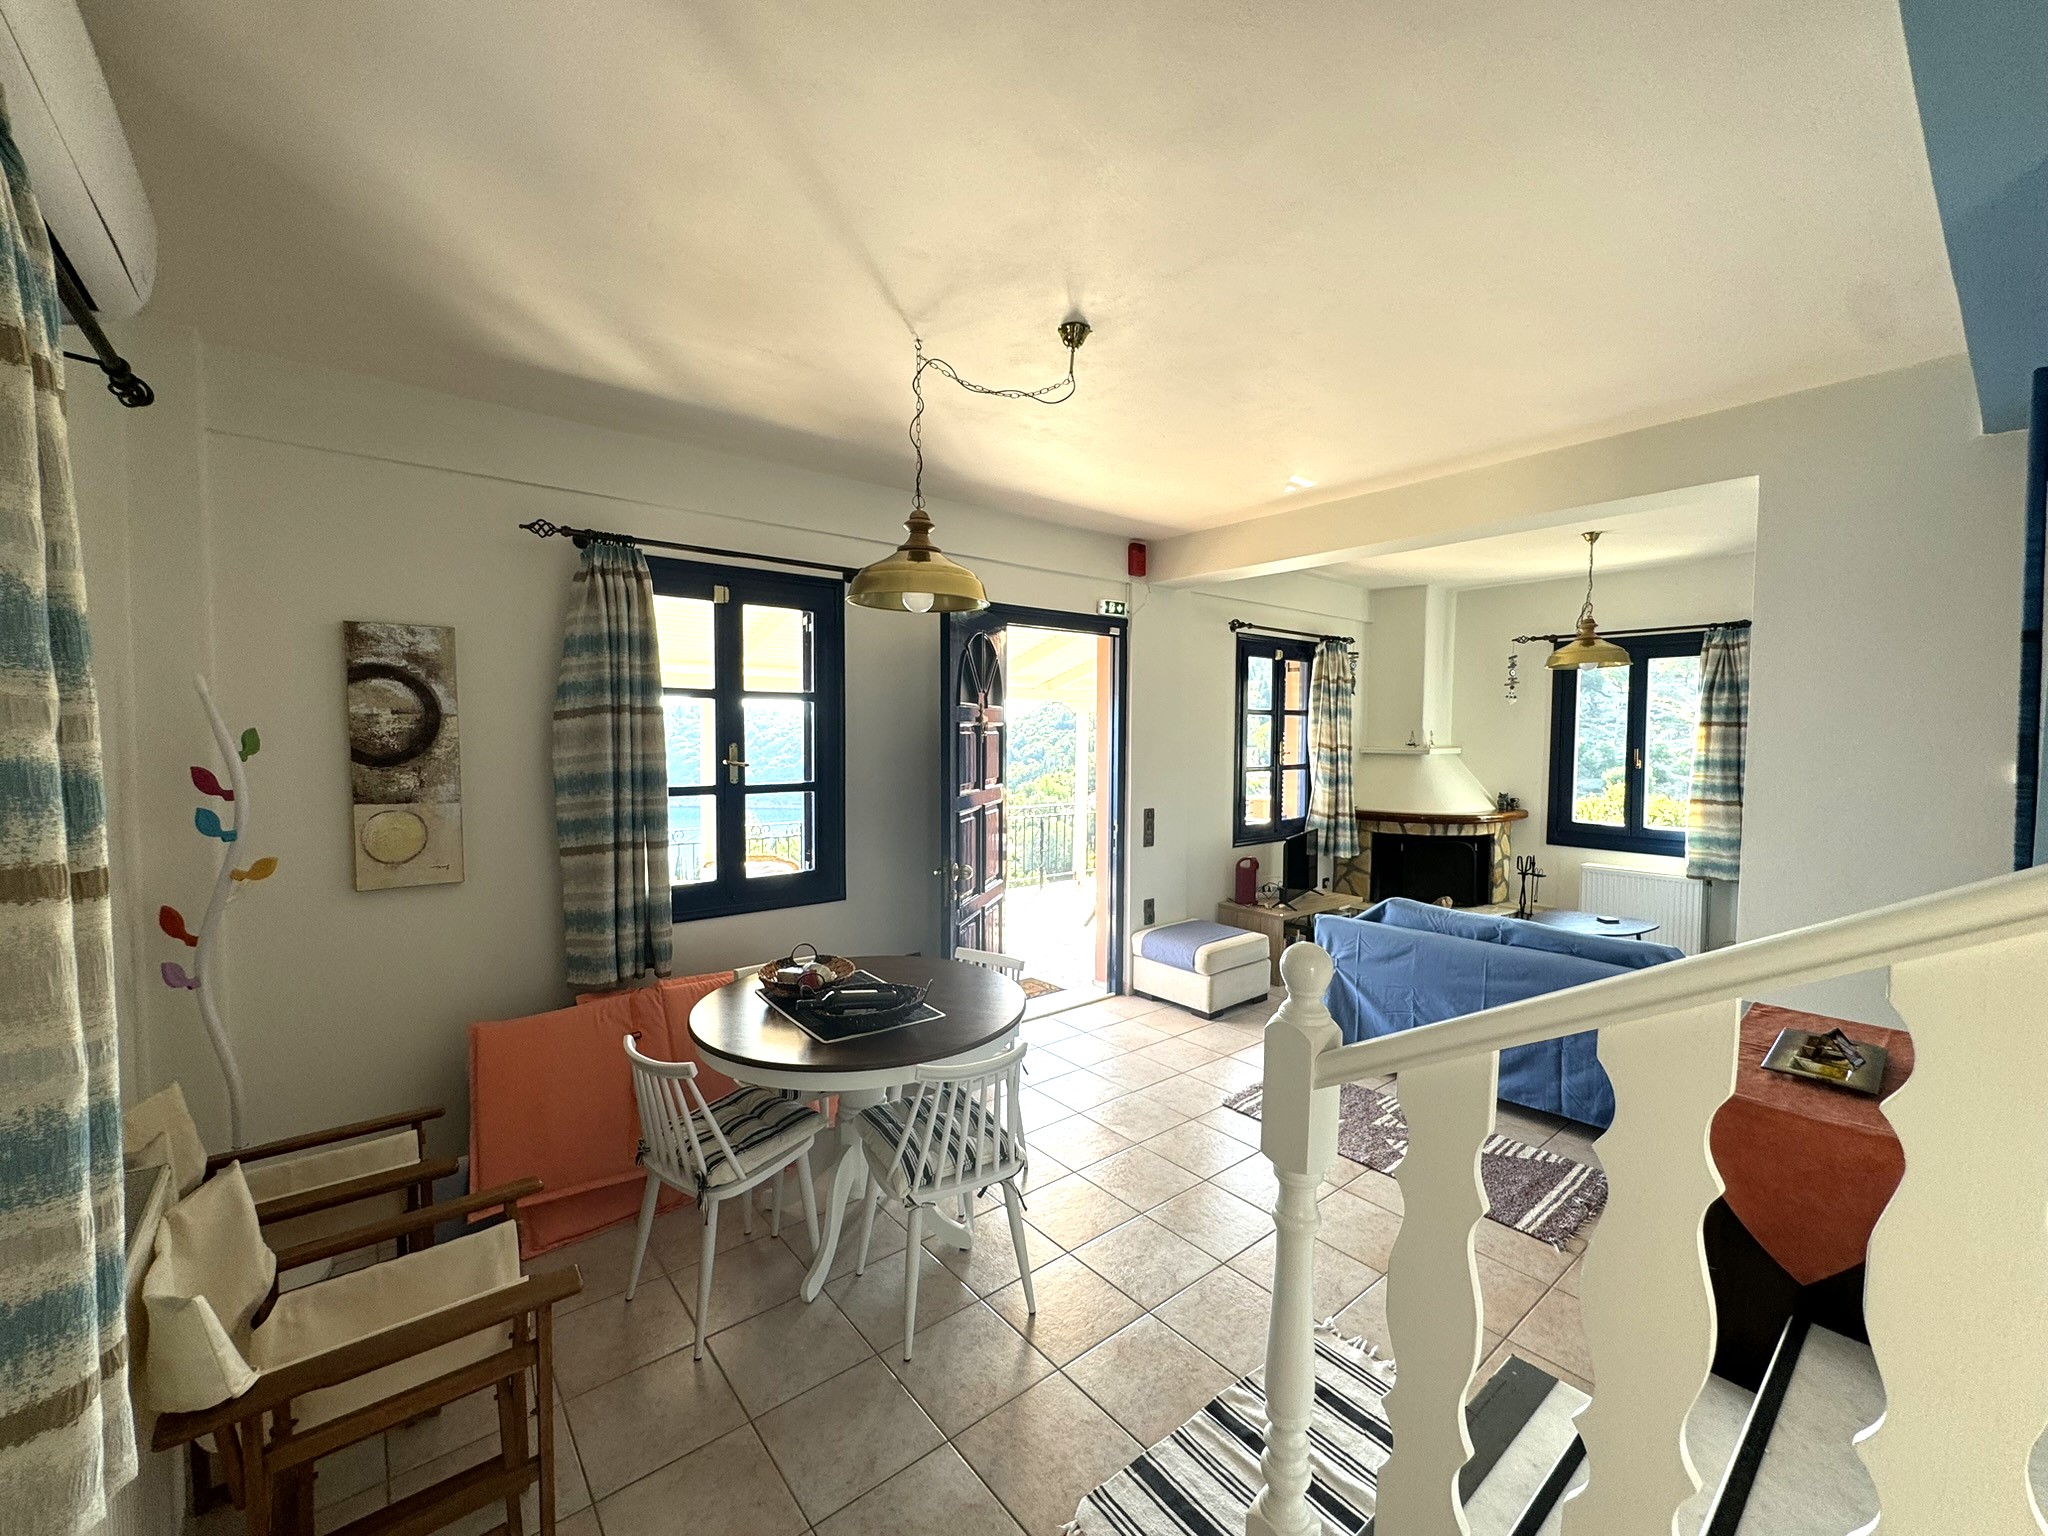 Dining and lounge area of house for sale in Ithaca Greece Kioni